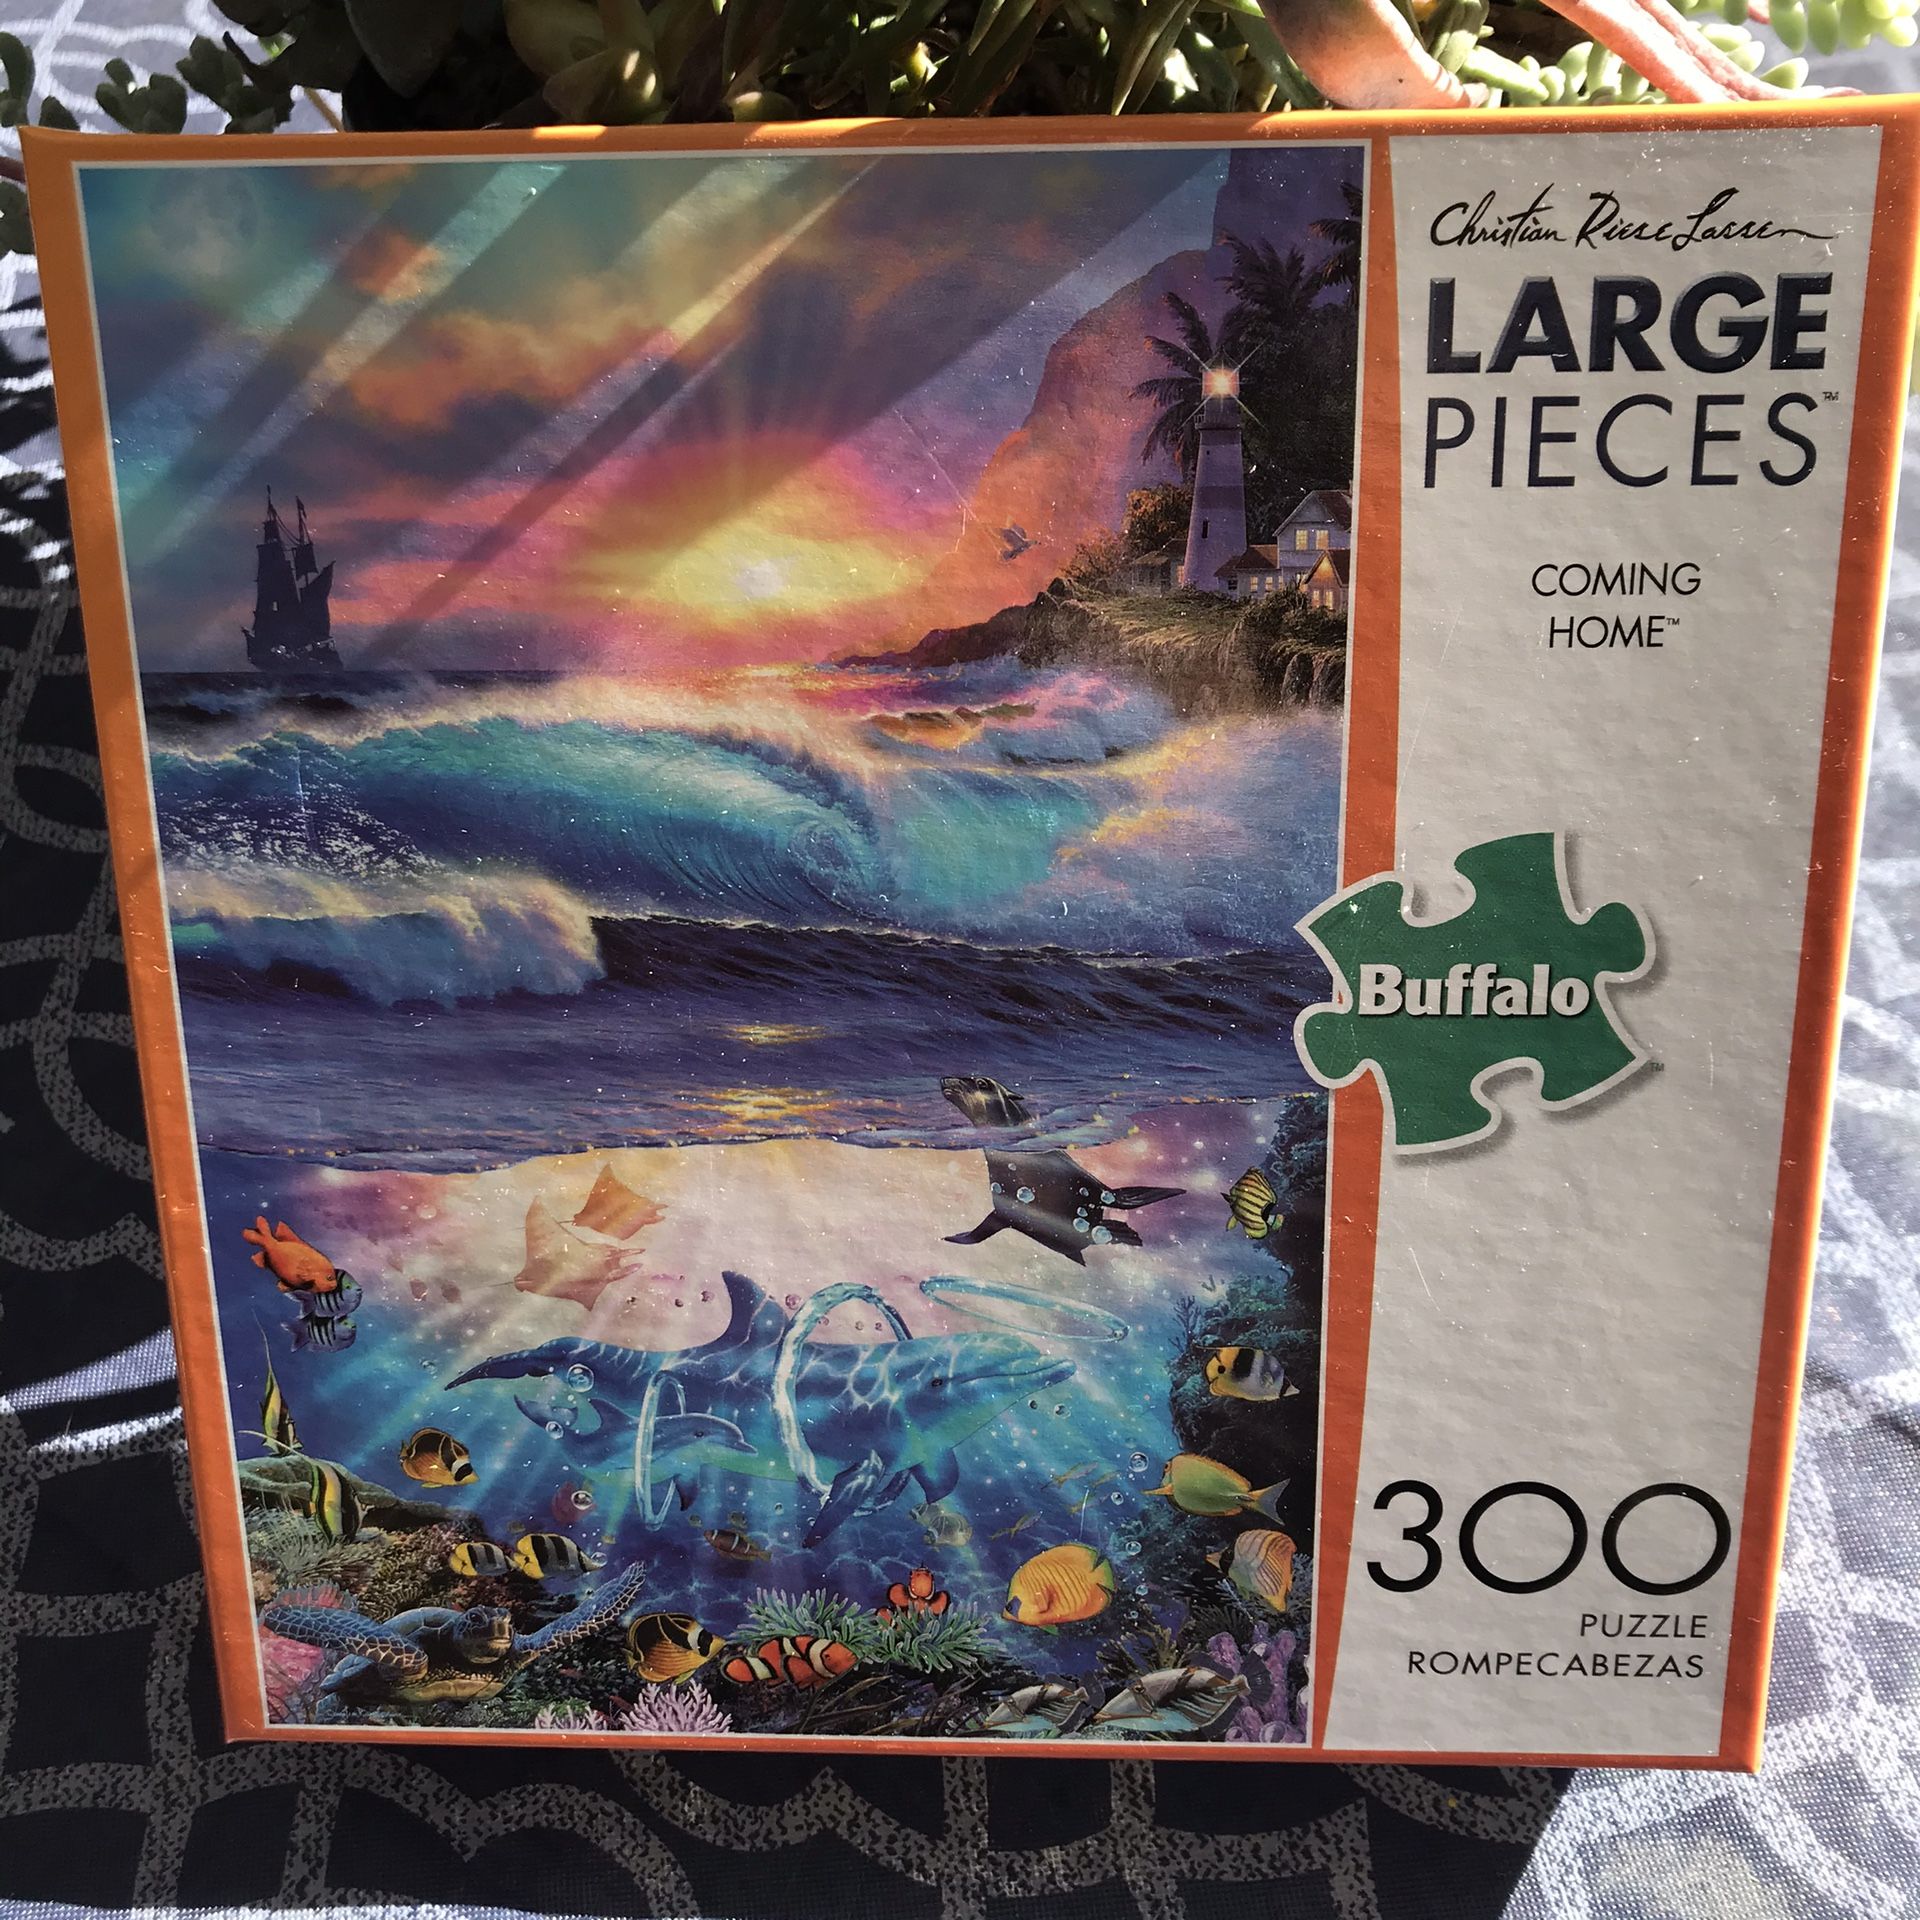 NEW!!! 300 Large Piece Puzzle COMING HOME